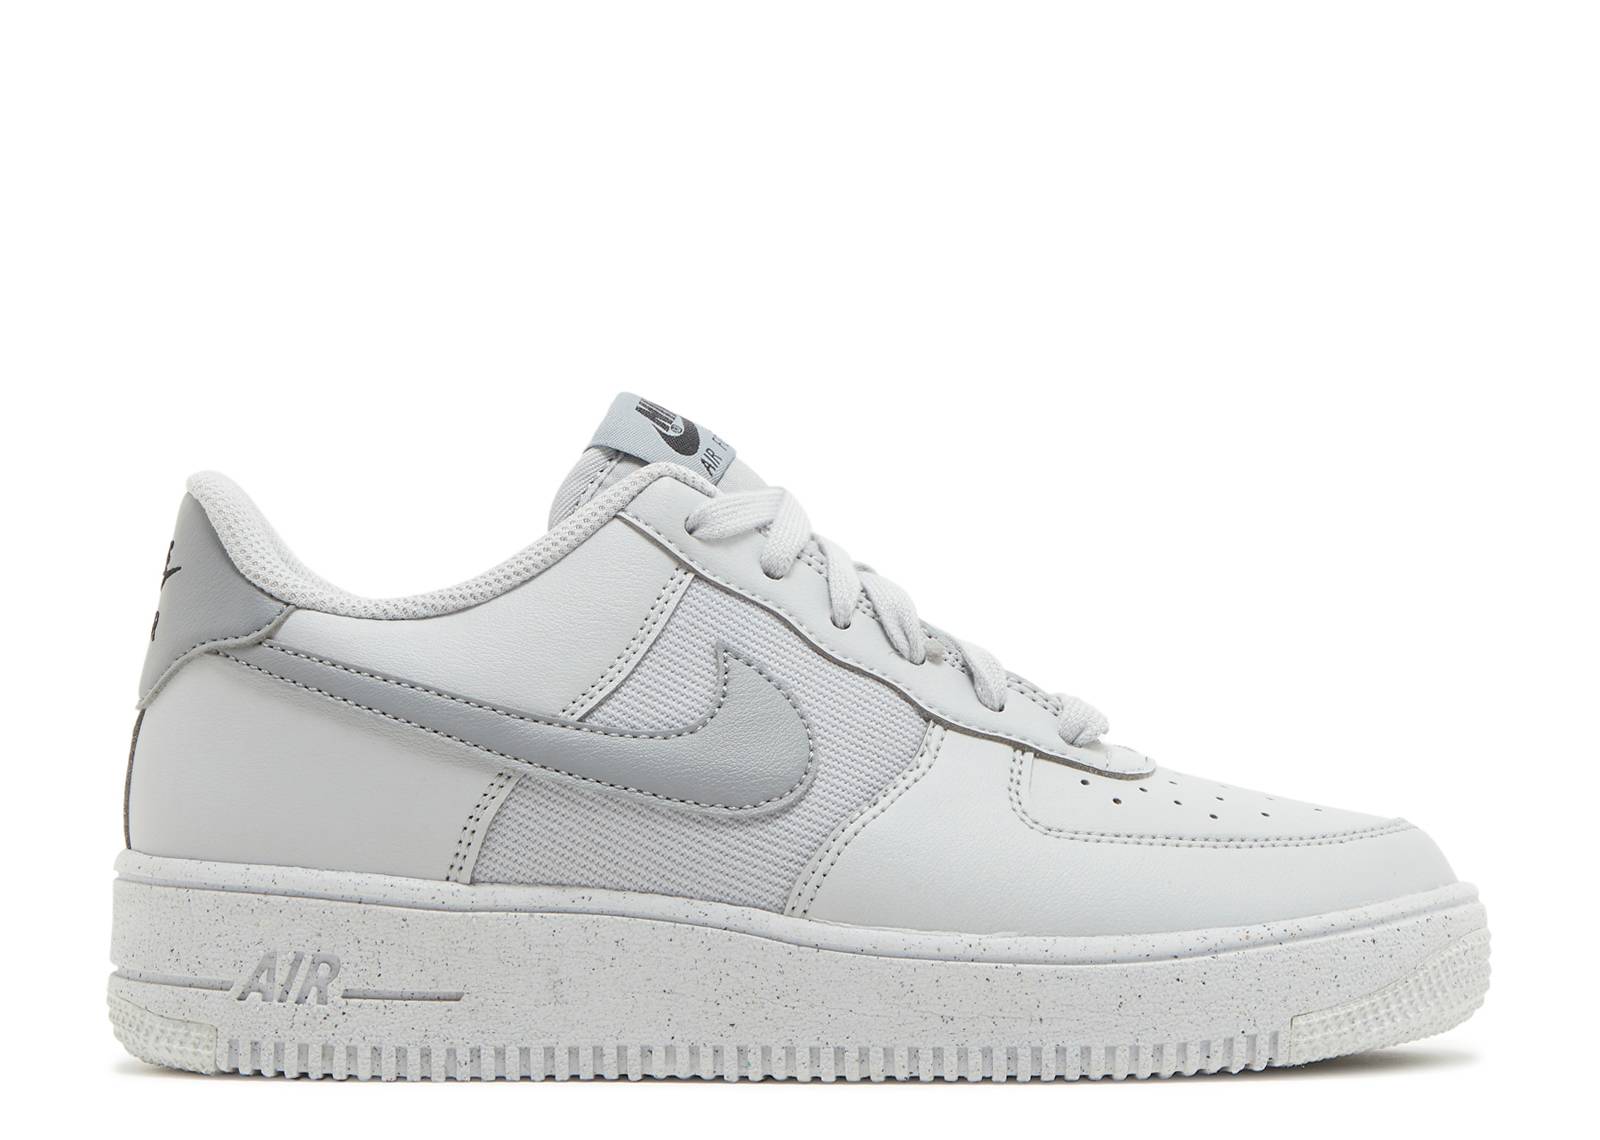 Air Force 1 Crater GS 'Light Smoke Grey'Color:Grey,Size:10.5